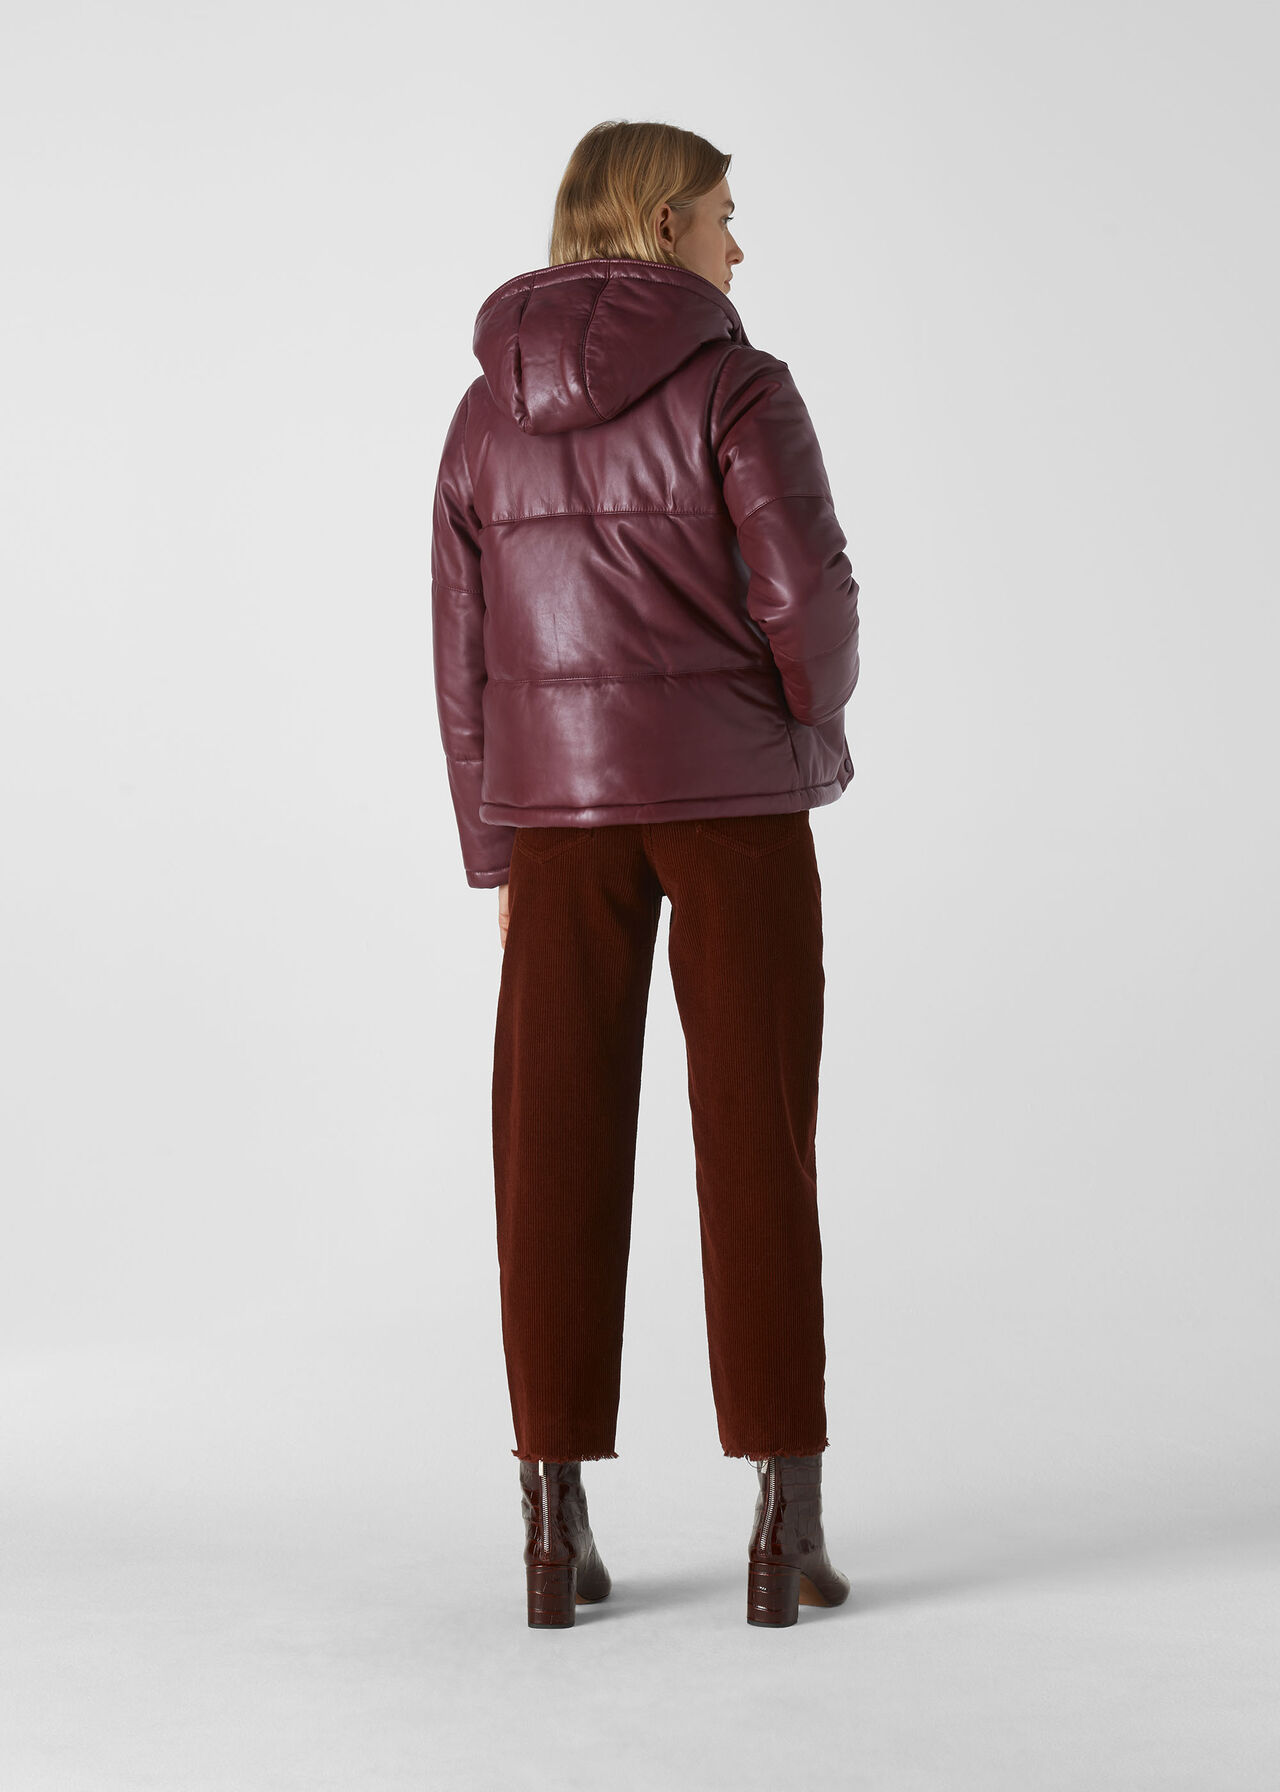 Burgundy Leather Puffer Jacket, WHISTLES